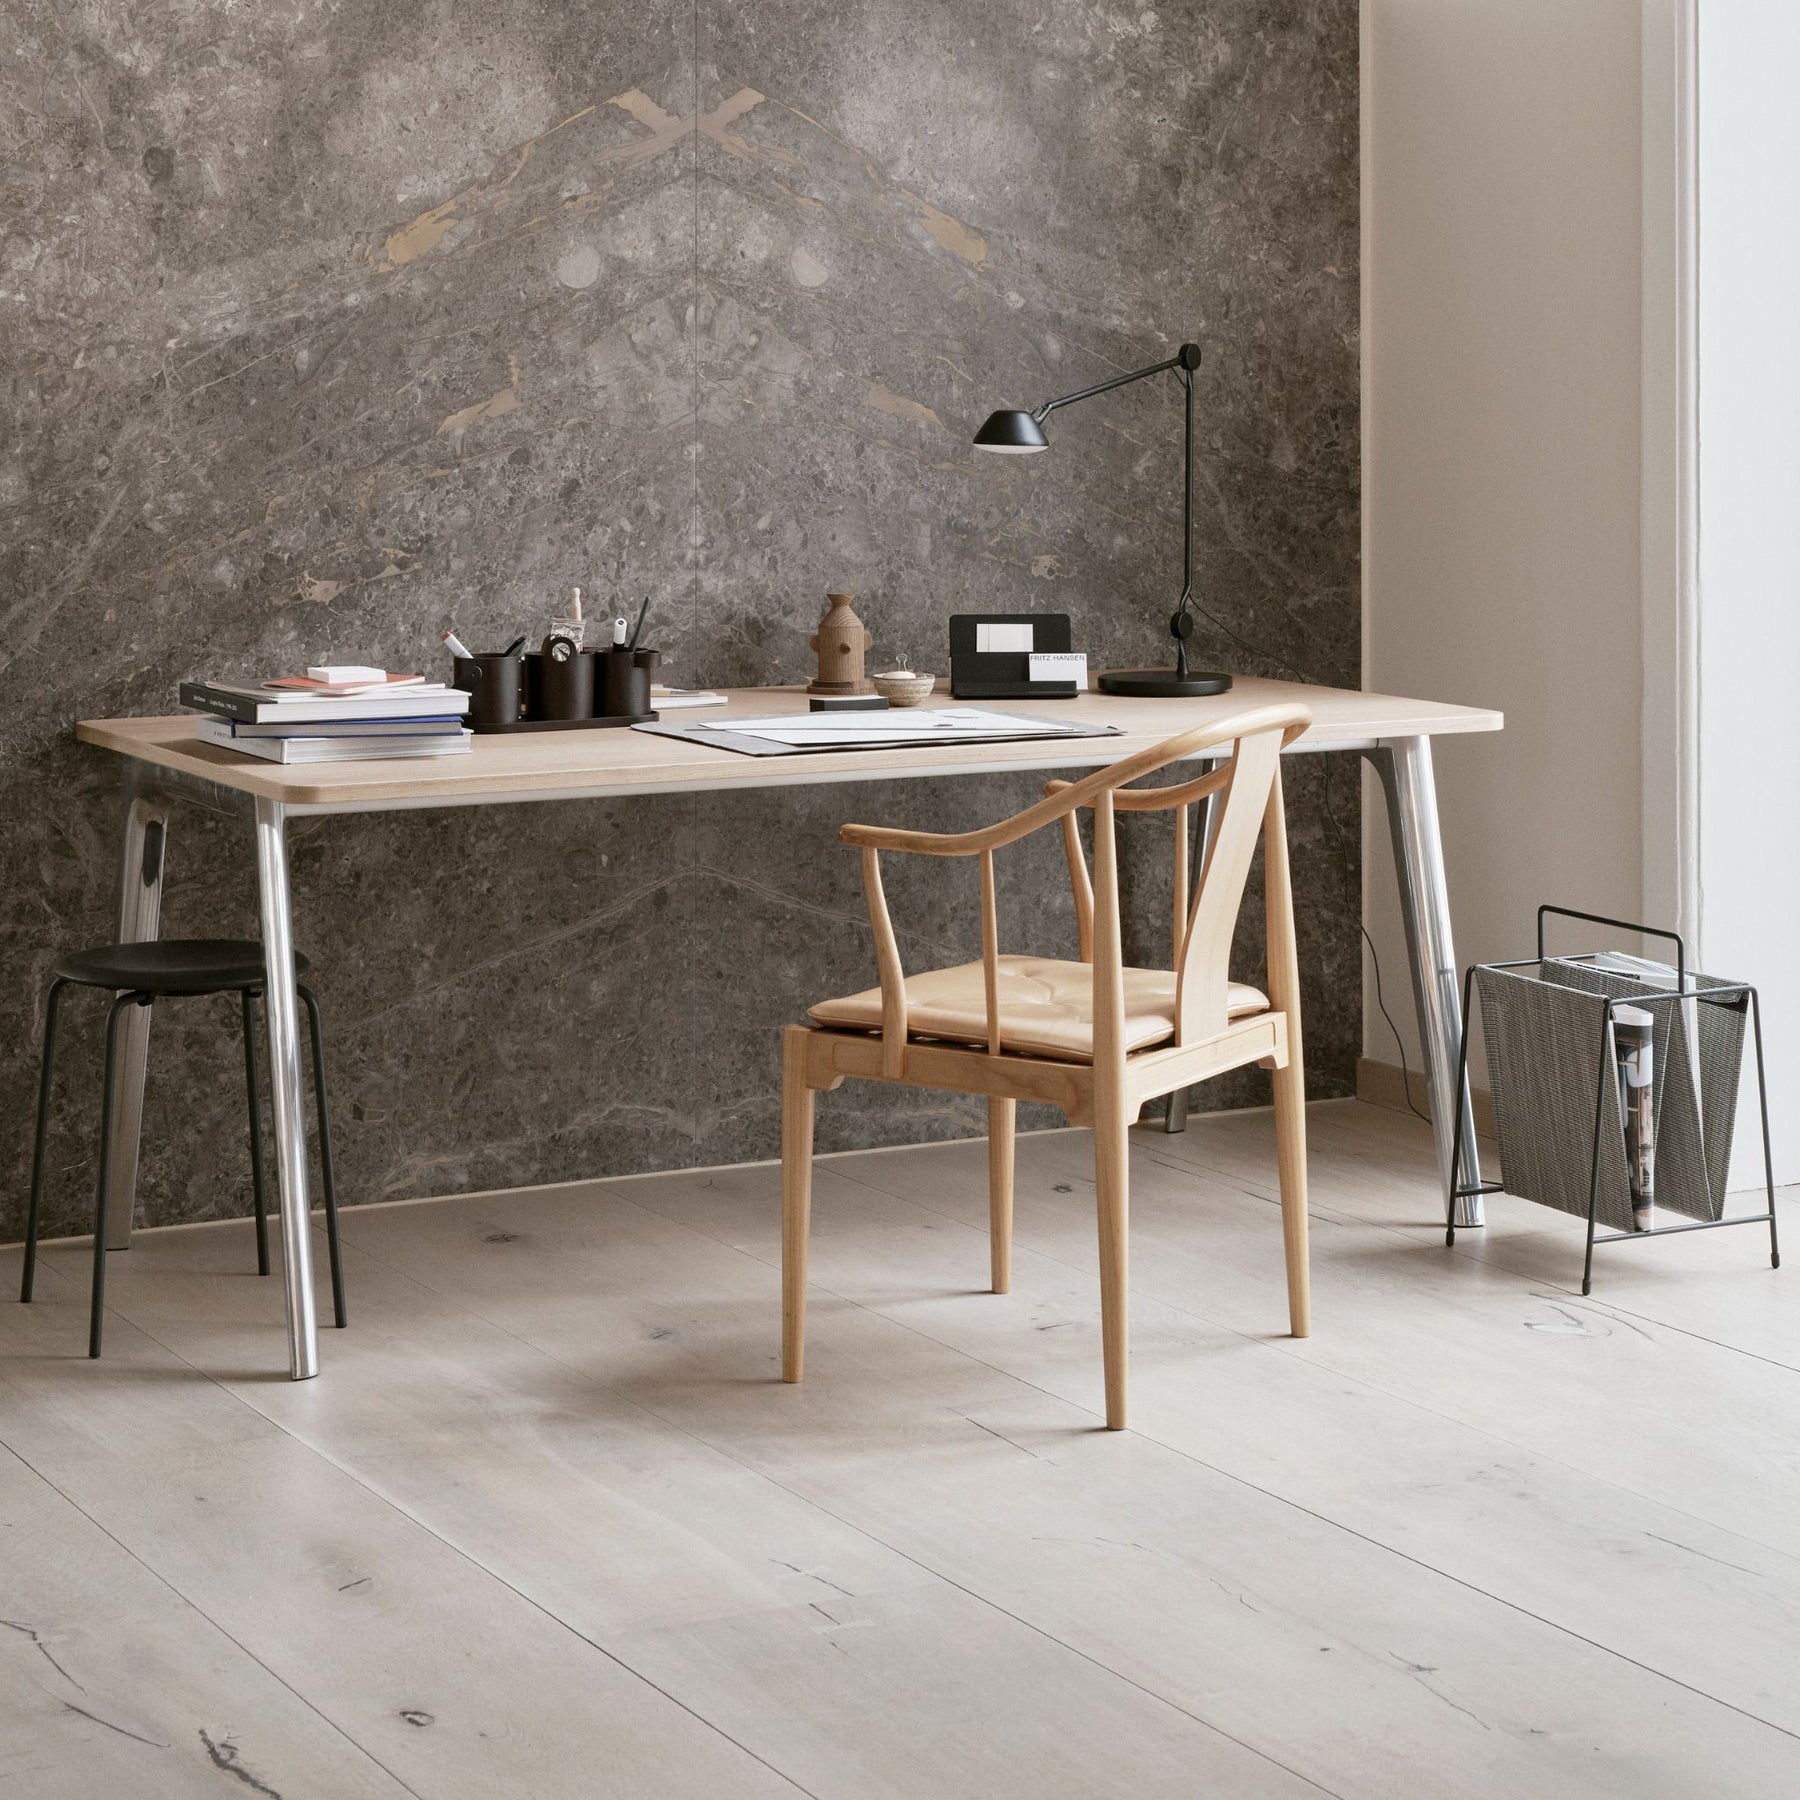 Fritz Hansen China Chair in Home Office with Pluralis Desk and Dot Stool